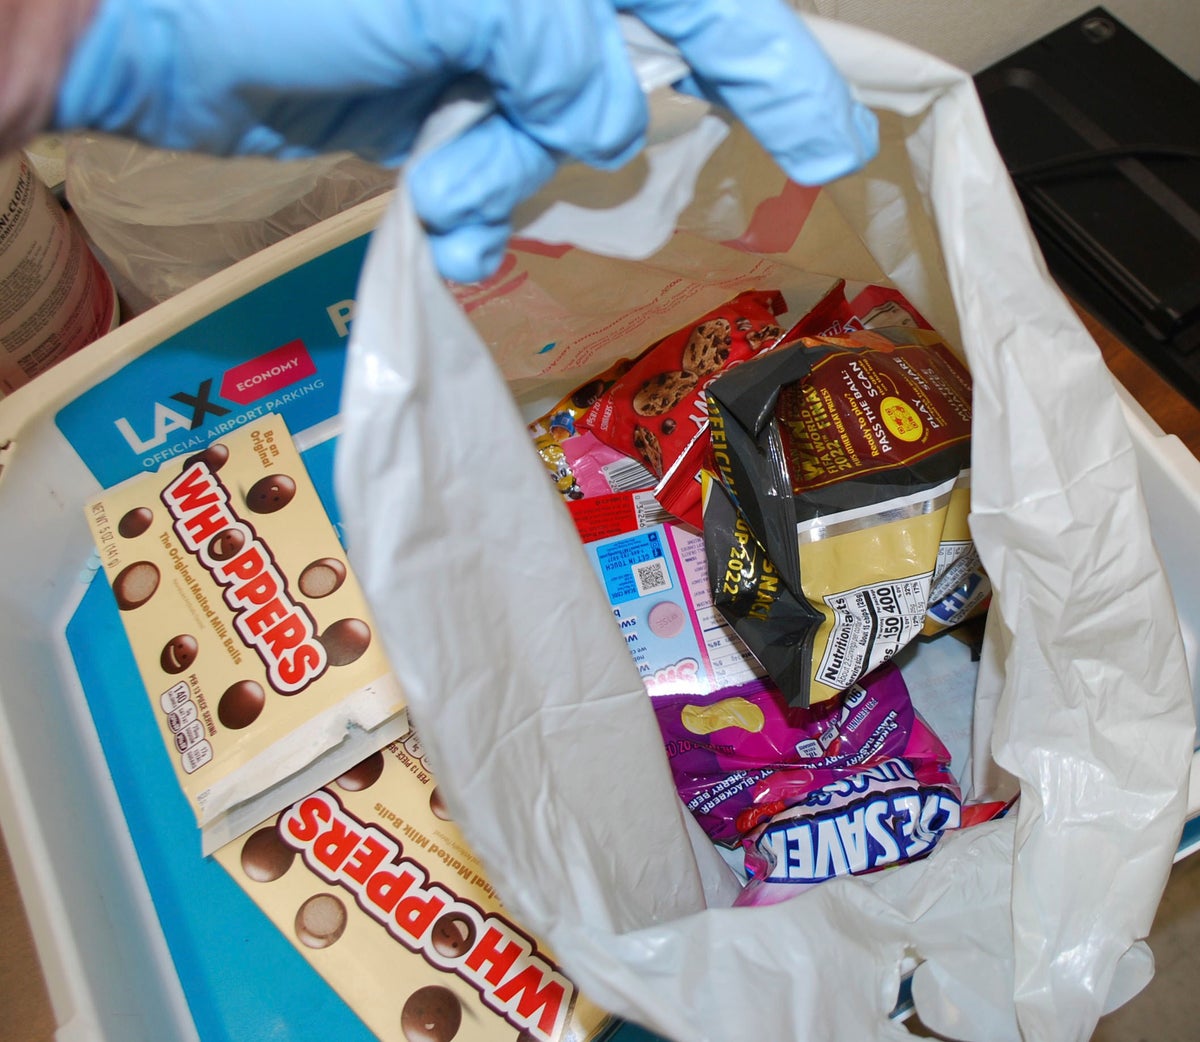 Fentanyl pills disguised in candy bags seized at LA airport